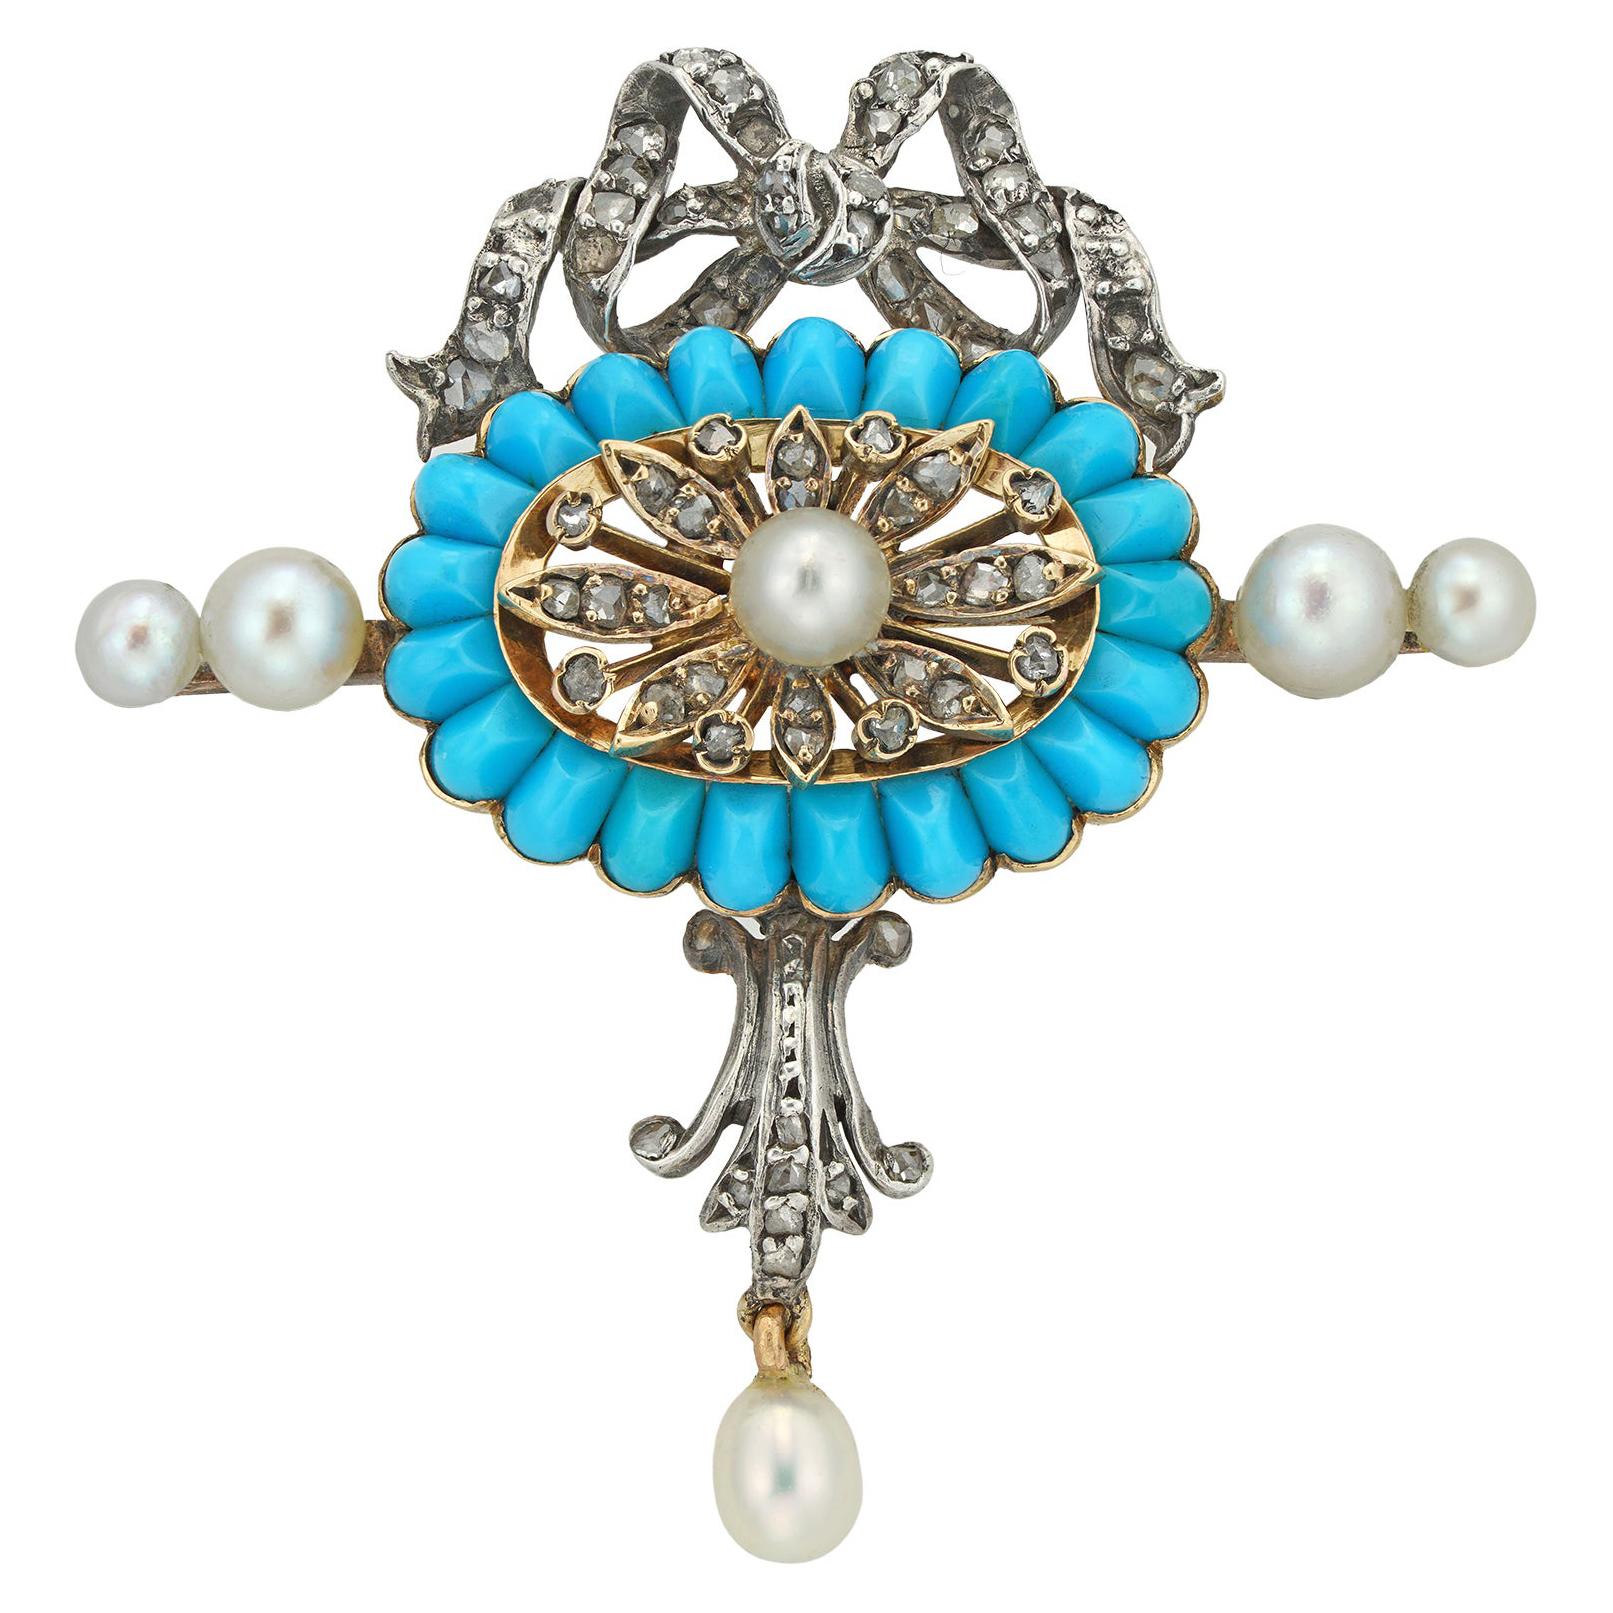 Edwardian Turquoise, Pearl, and Diamond Brooch